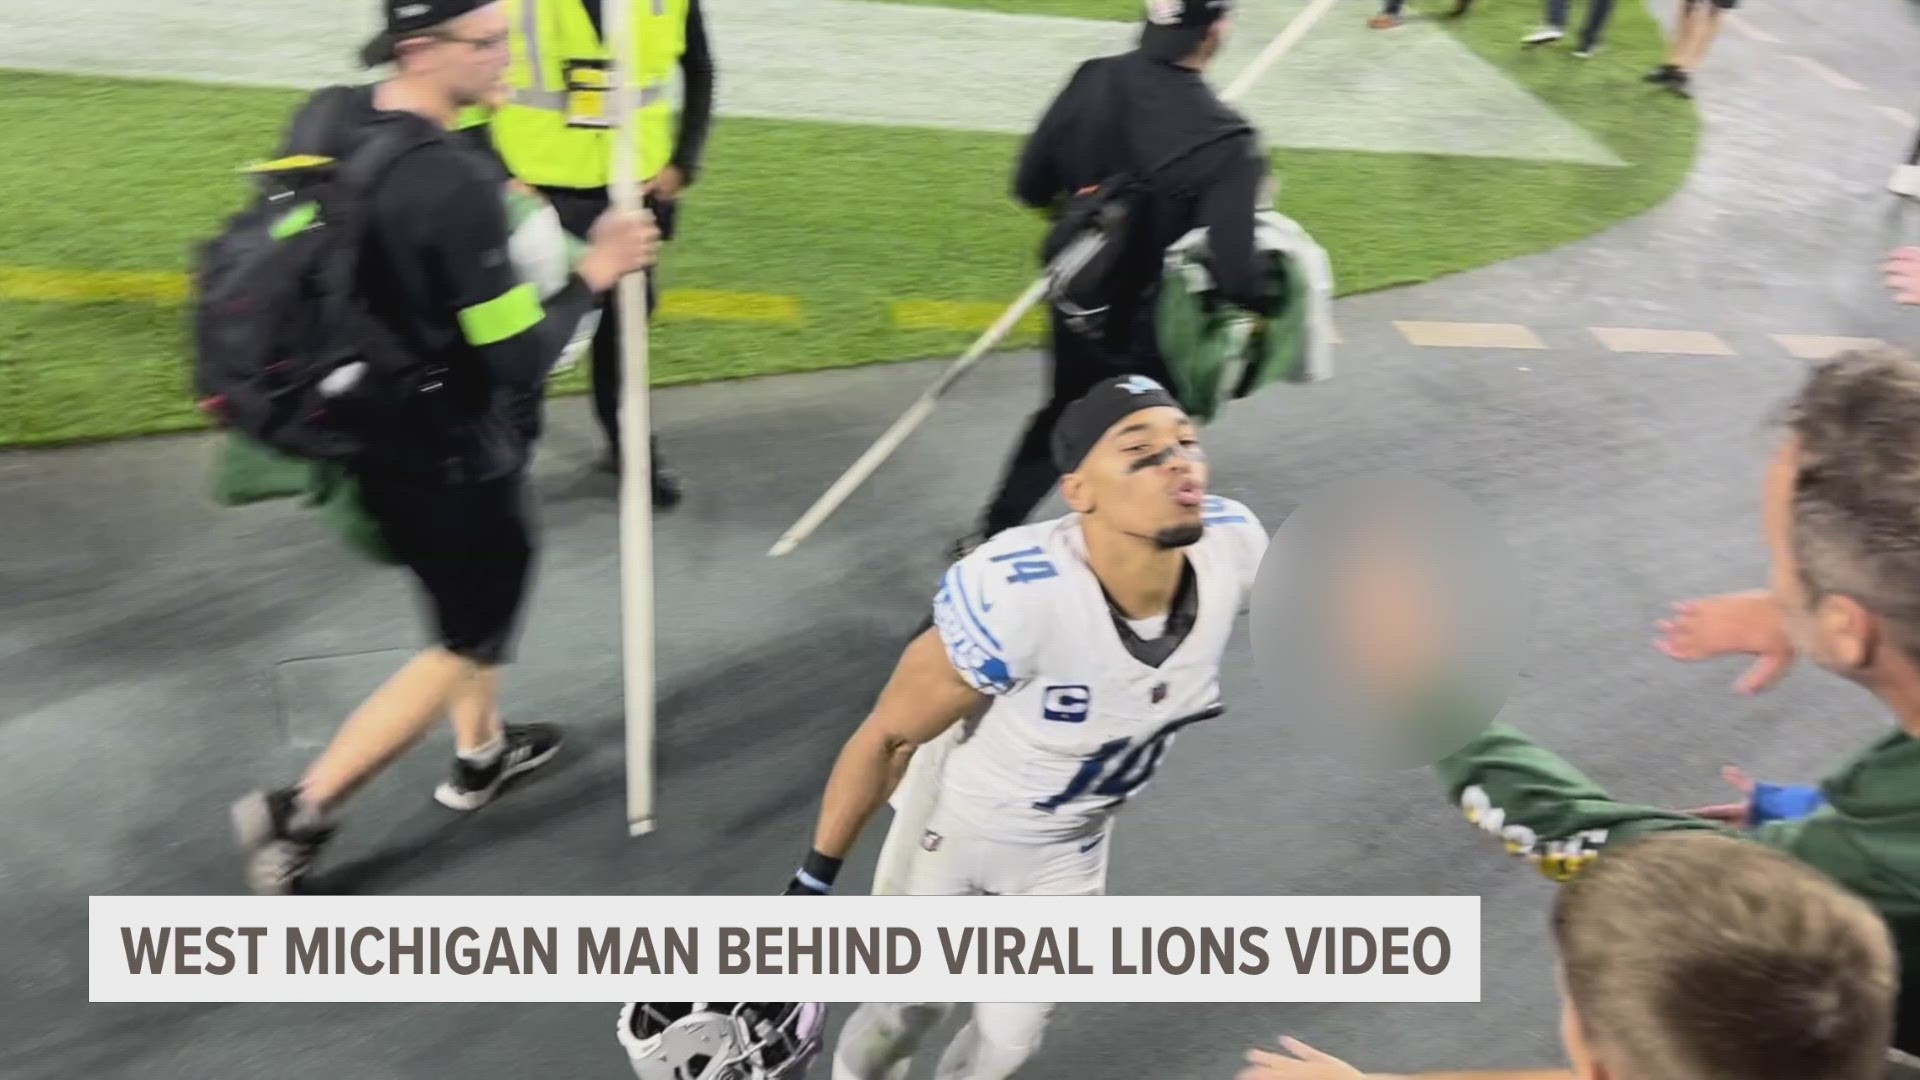 Diehard Lions fan Zach Harig is a West Michigander who's now making headlines across the country with a viral video from Lambeau Field Thursday night.